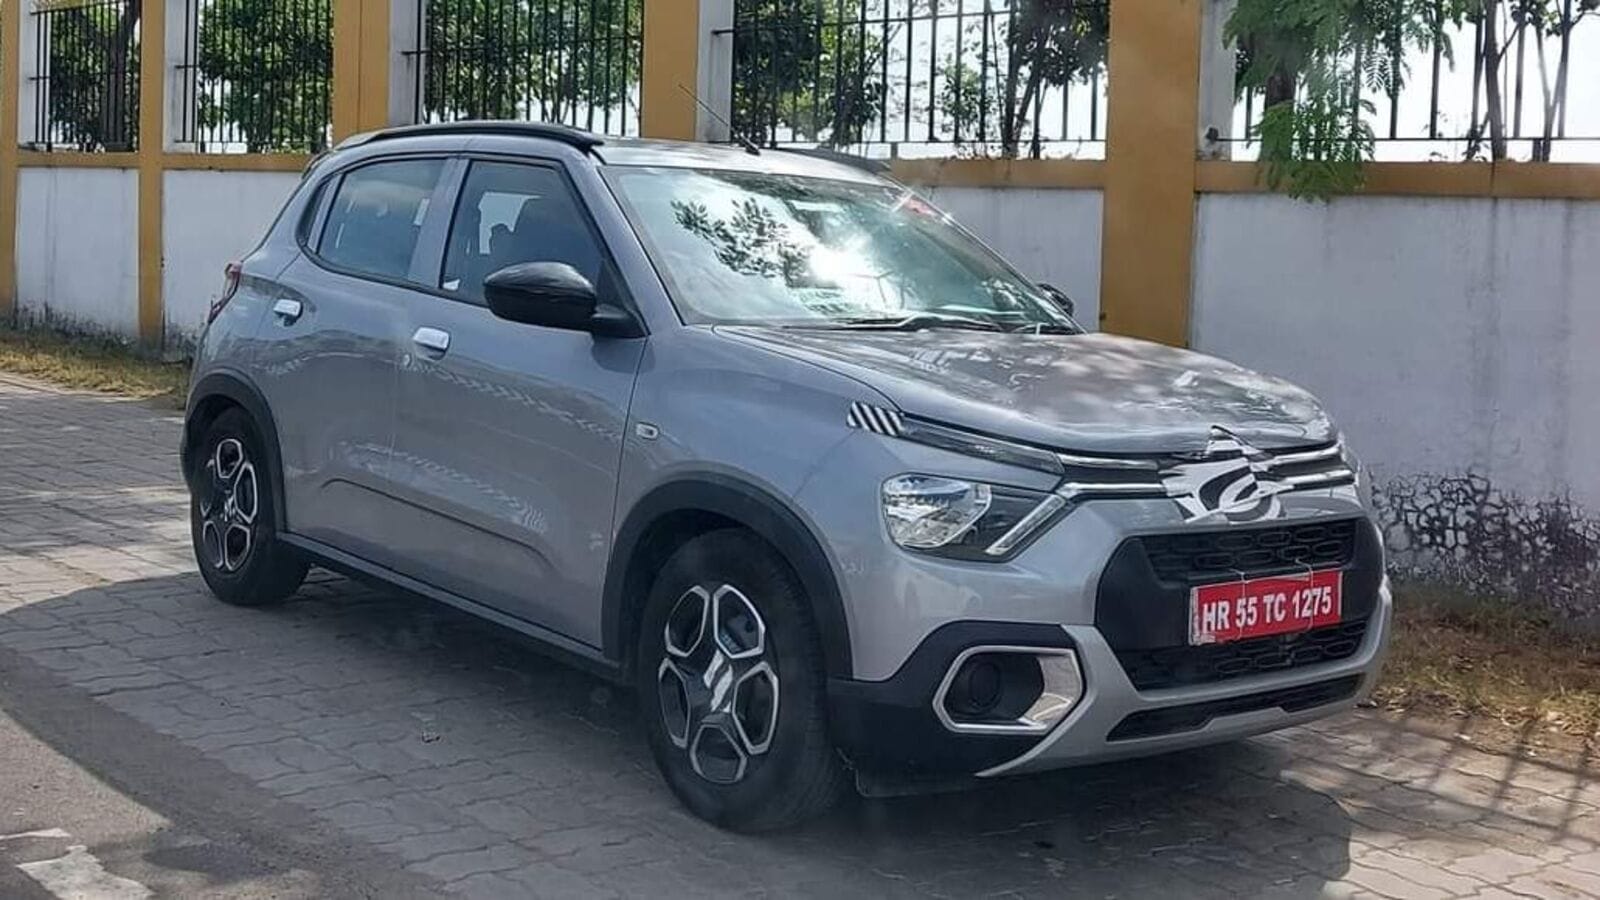 Citroen C3 SUV spotted in India undisguised, reveals exterior details